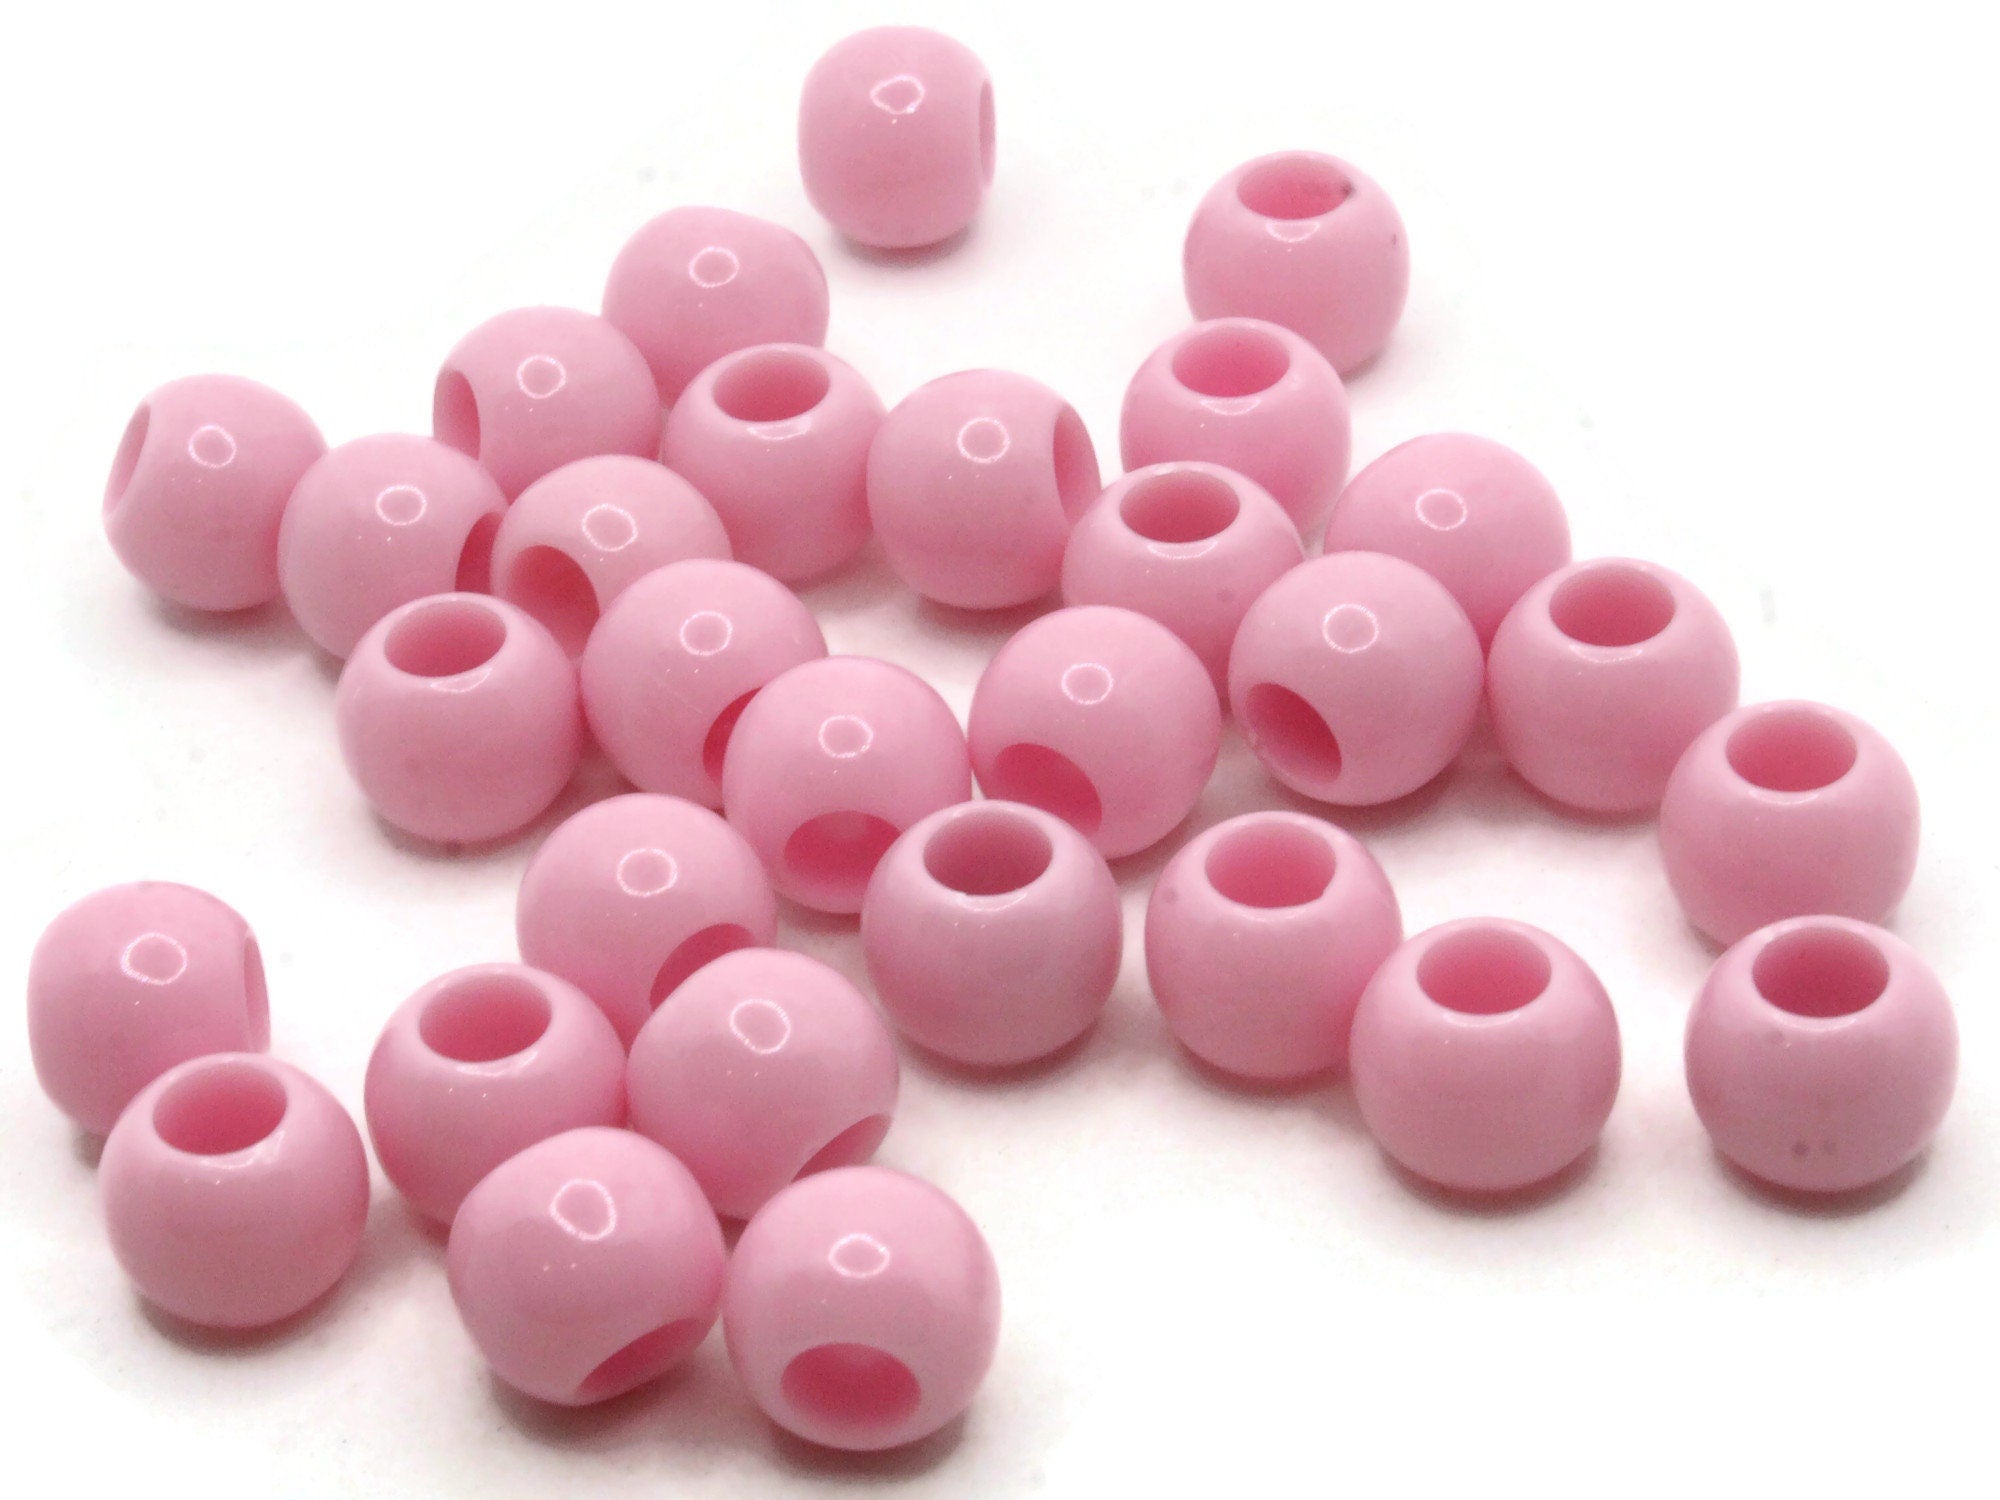 50 8mm Bright Pink Plastic Dice Beads by Smileyboy Beads | Michaels